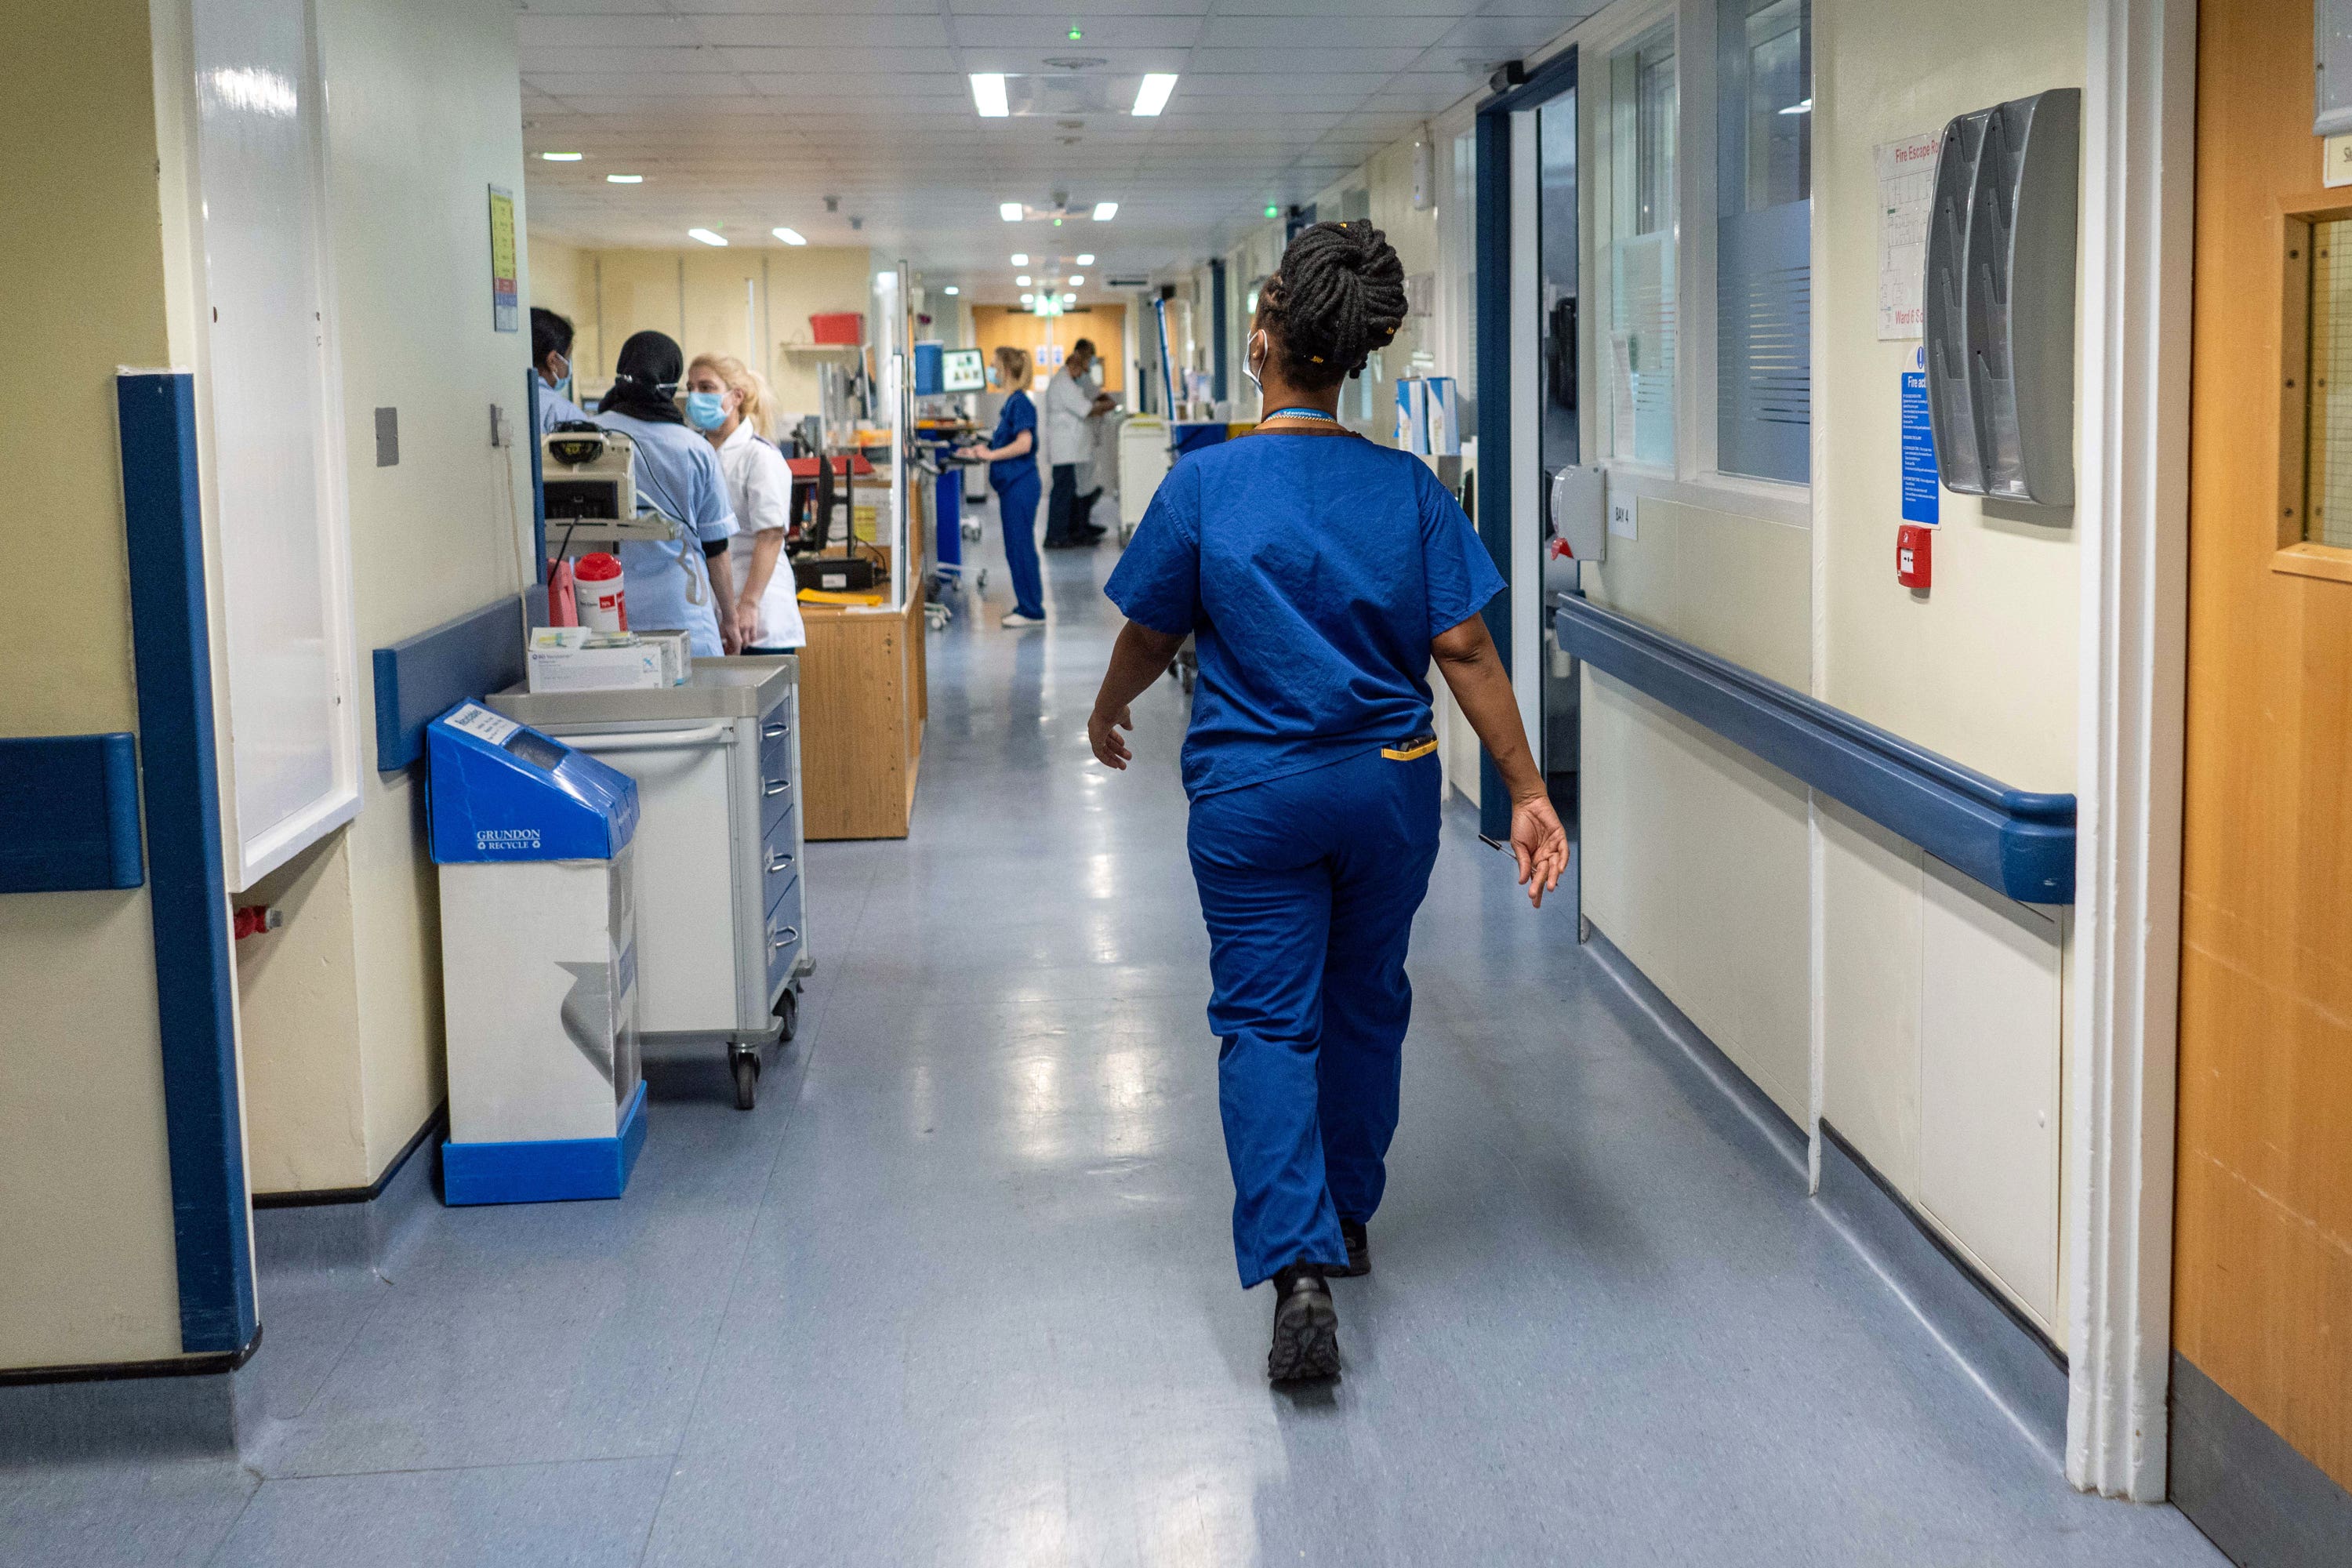 The official NHS workforce plan for England will be almost 11,000 new nurses behind target by 2025 if current trends continue, according to a new report